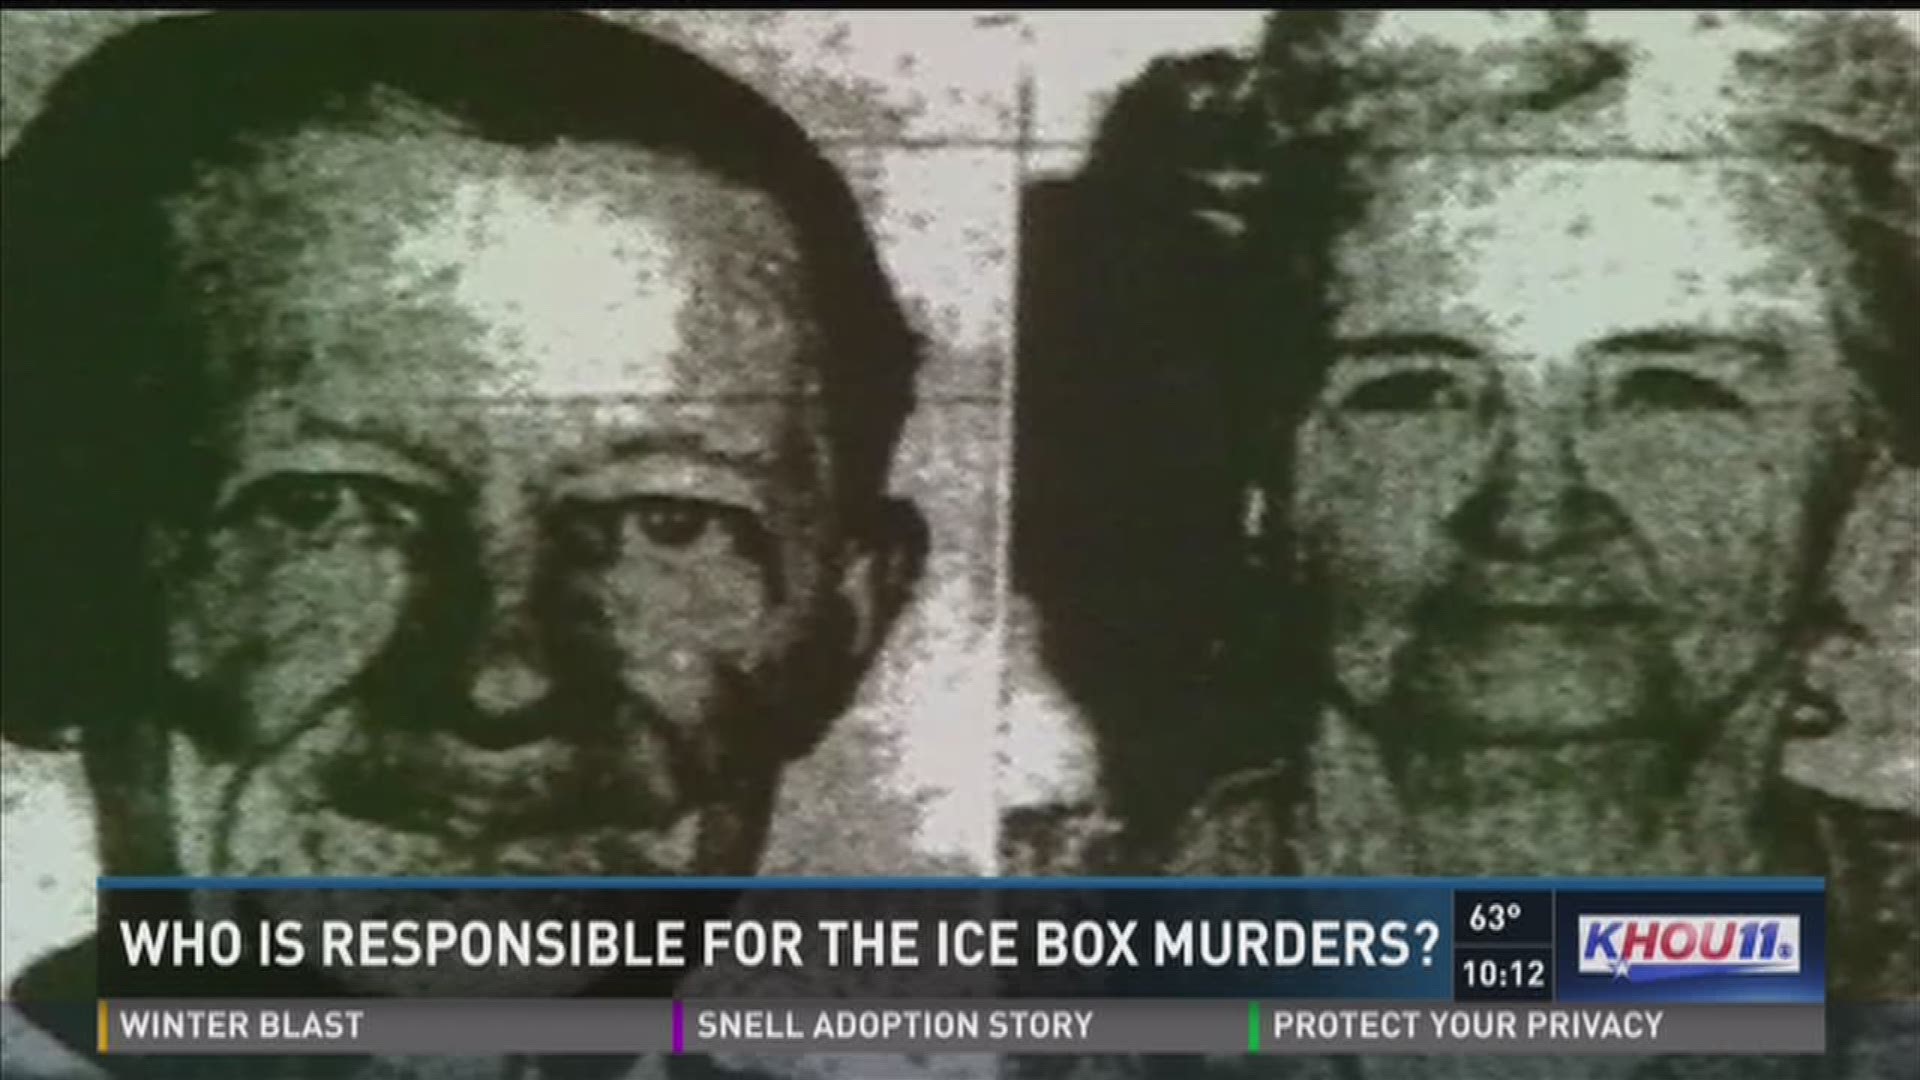 It's one of Houston's most notorious crimes, and 50 years later, people are still puzzled by the Ice Box Murders.